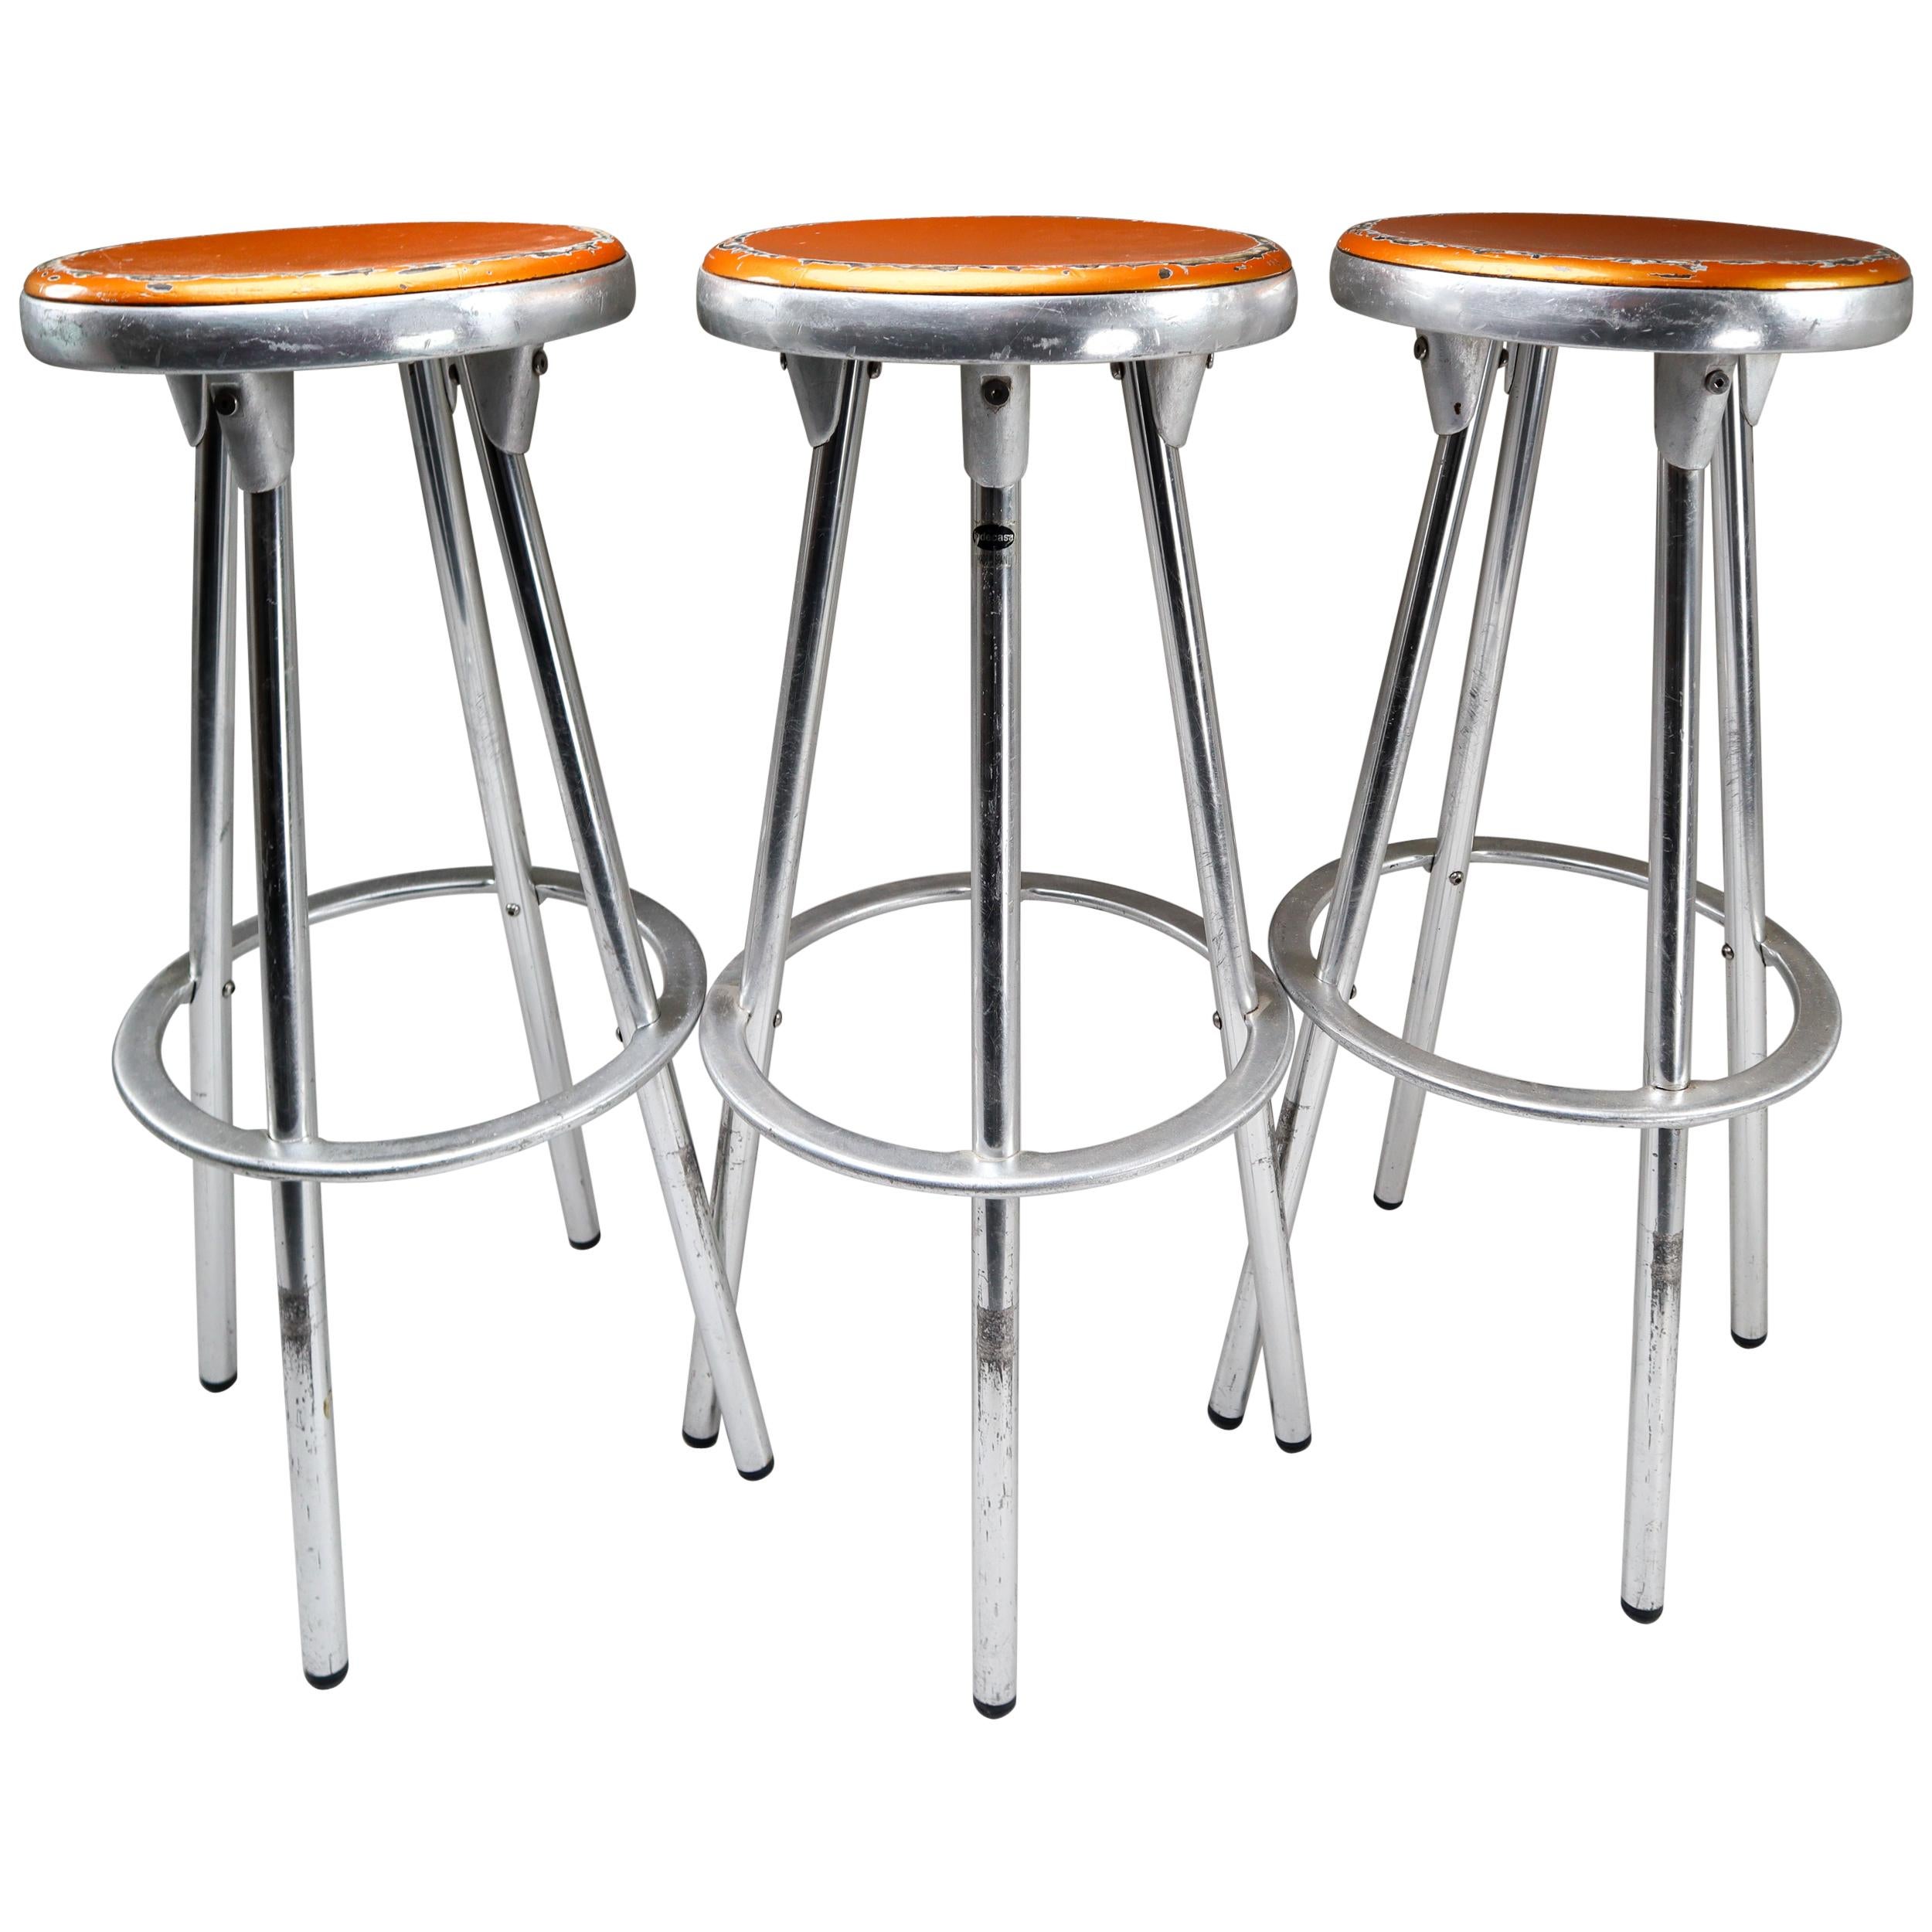 3 Industrial Bar Stools in Aluminum by Joan Casas Y Ortinez for Indecasa Spain